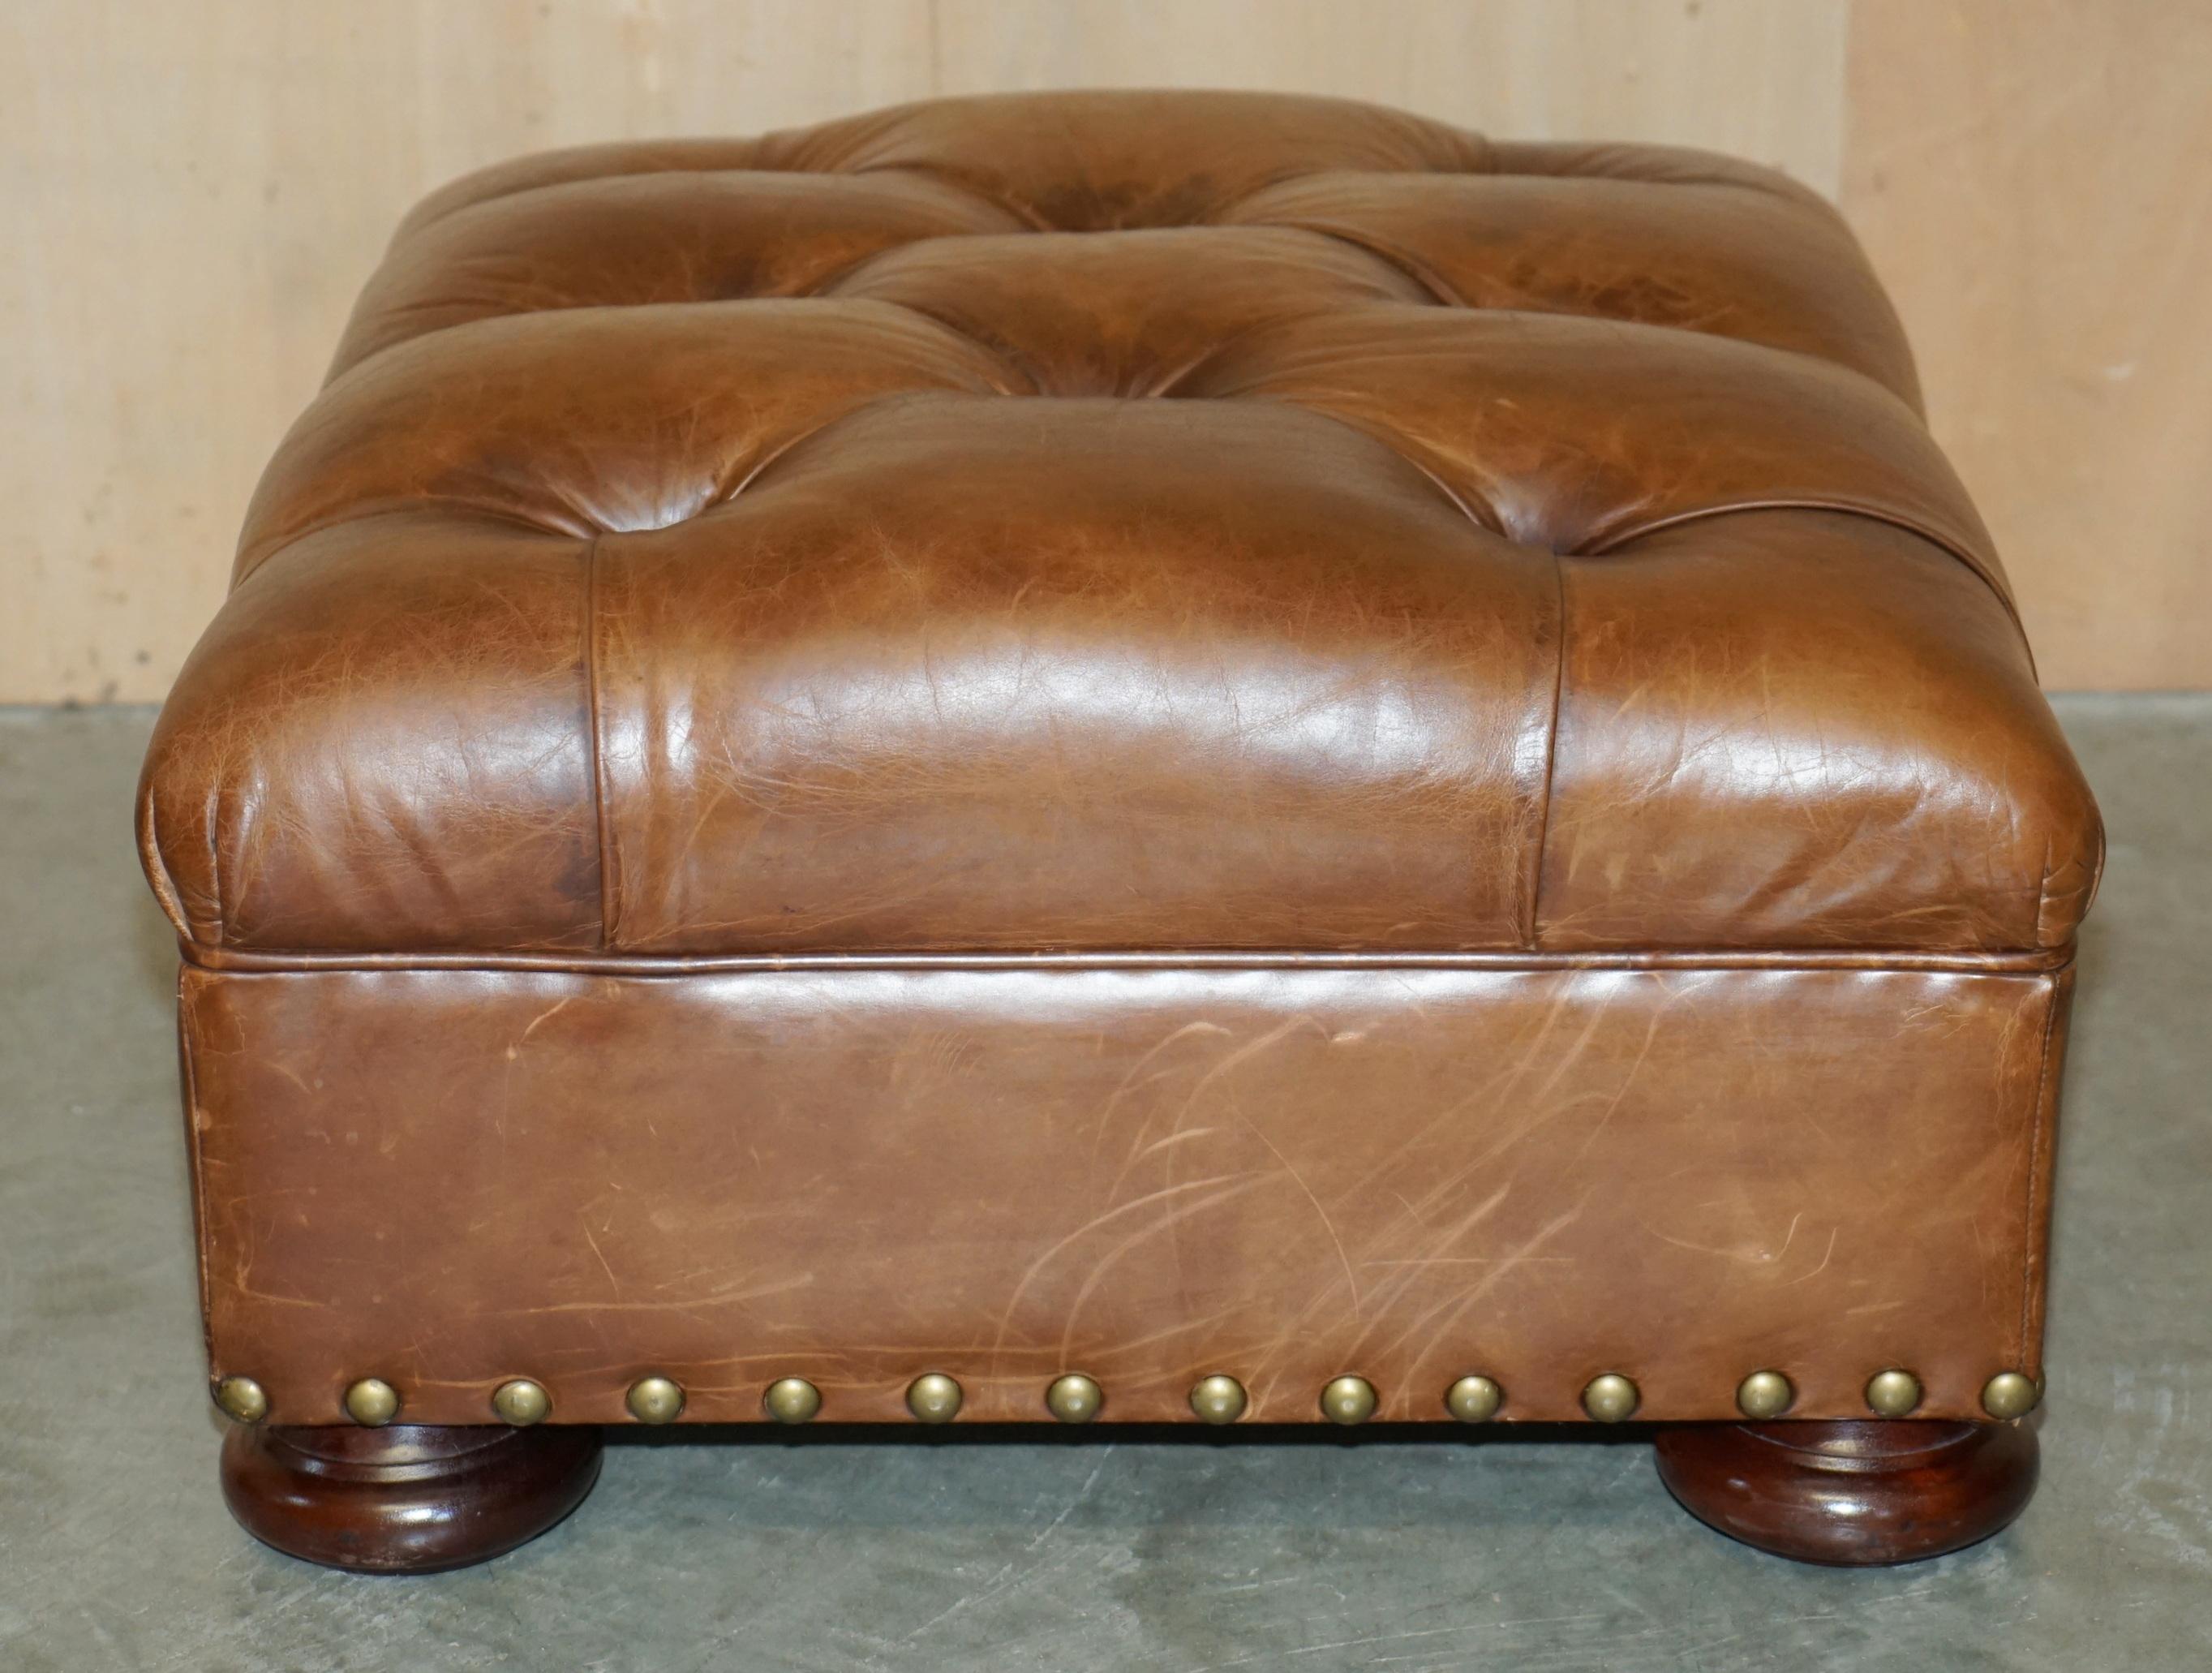 RALPH LAUREN WRITER'S CHESTERFIELD FOOTSTOOL OTTOMAN IN HERiTAGE BROWN LEATHER For Sale 10